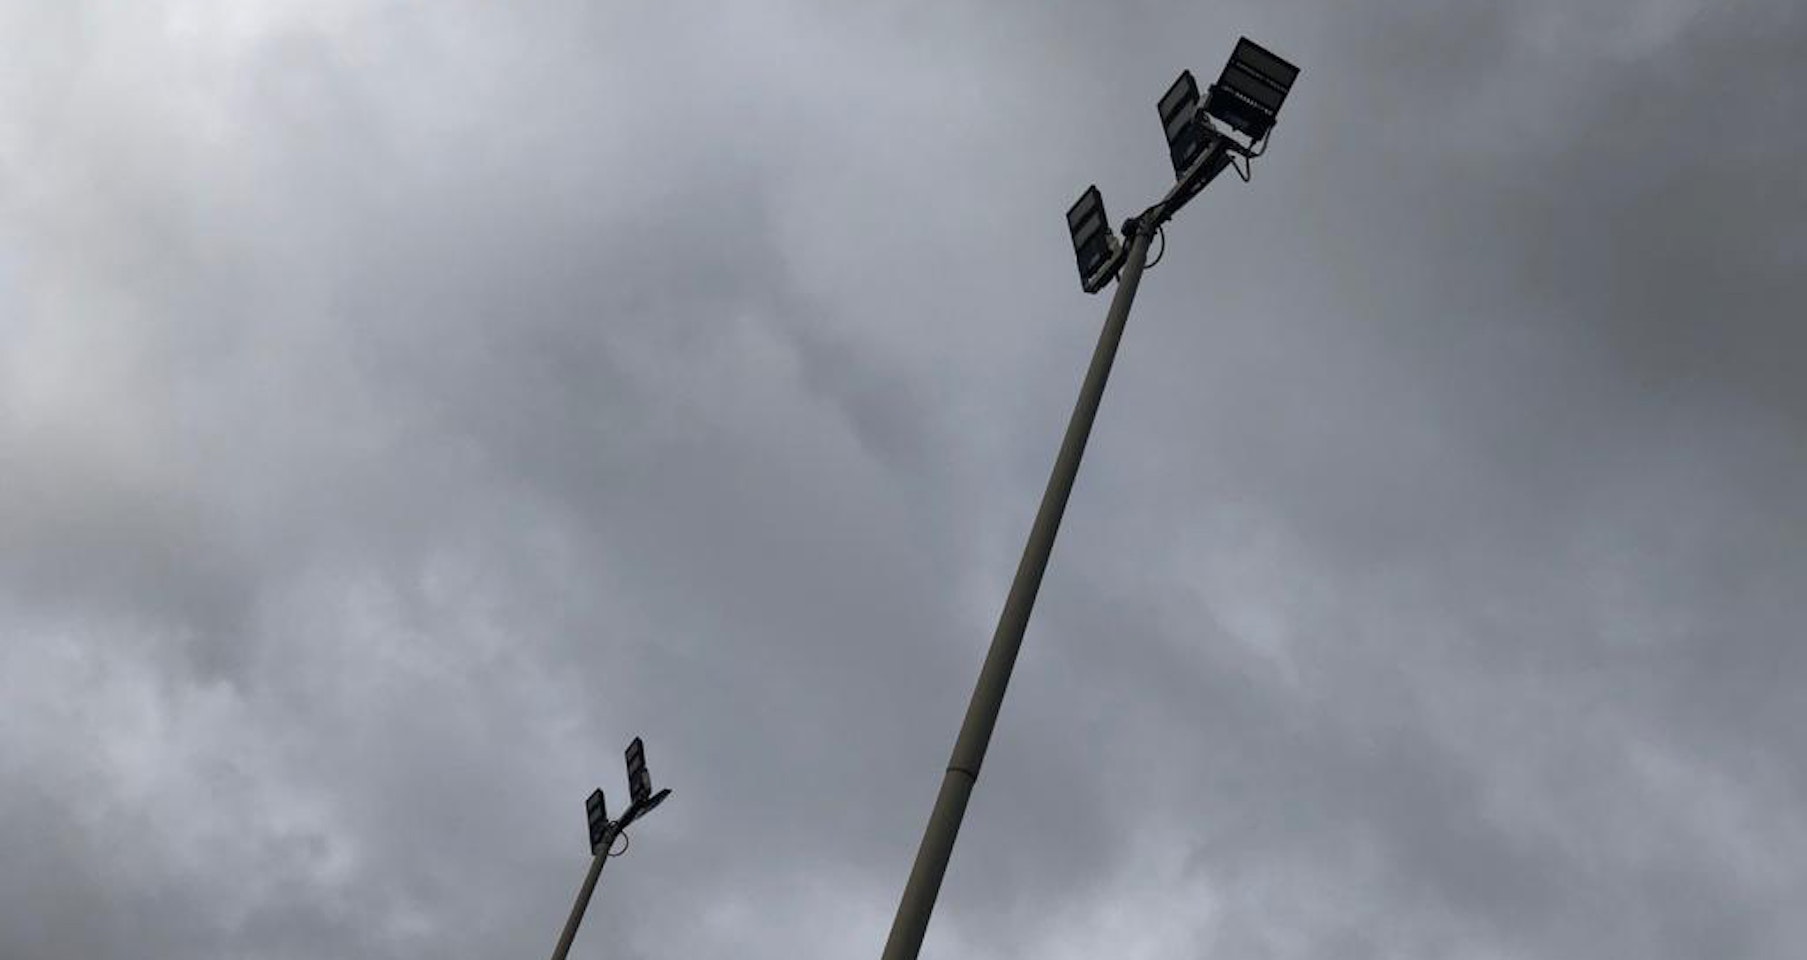 Butch LED Floodlight in application, installed on high pole on a mining / industrial site